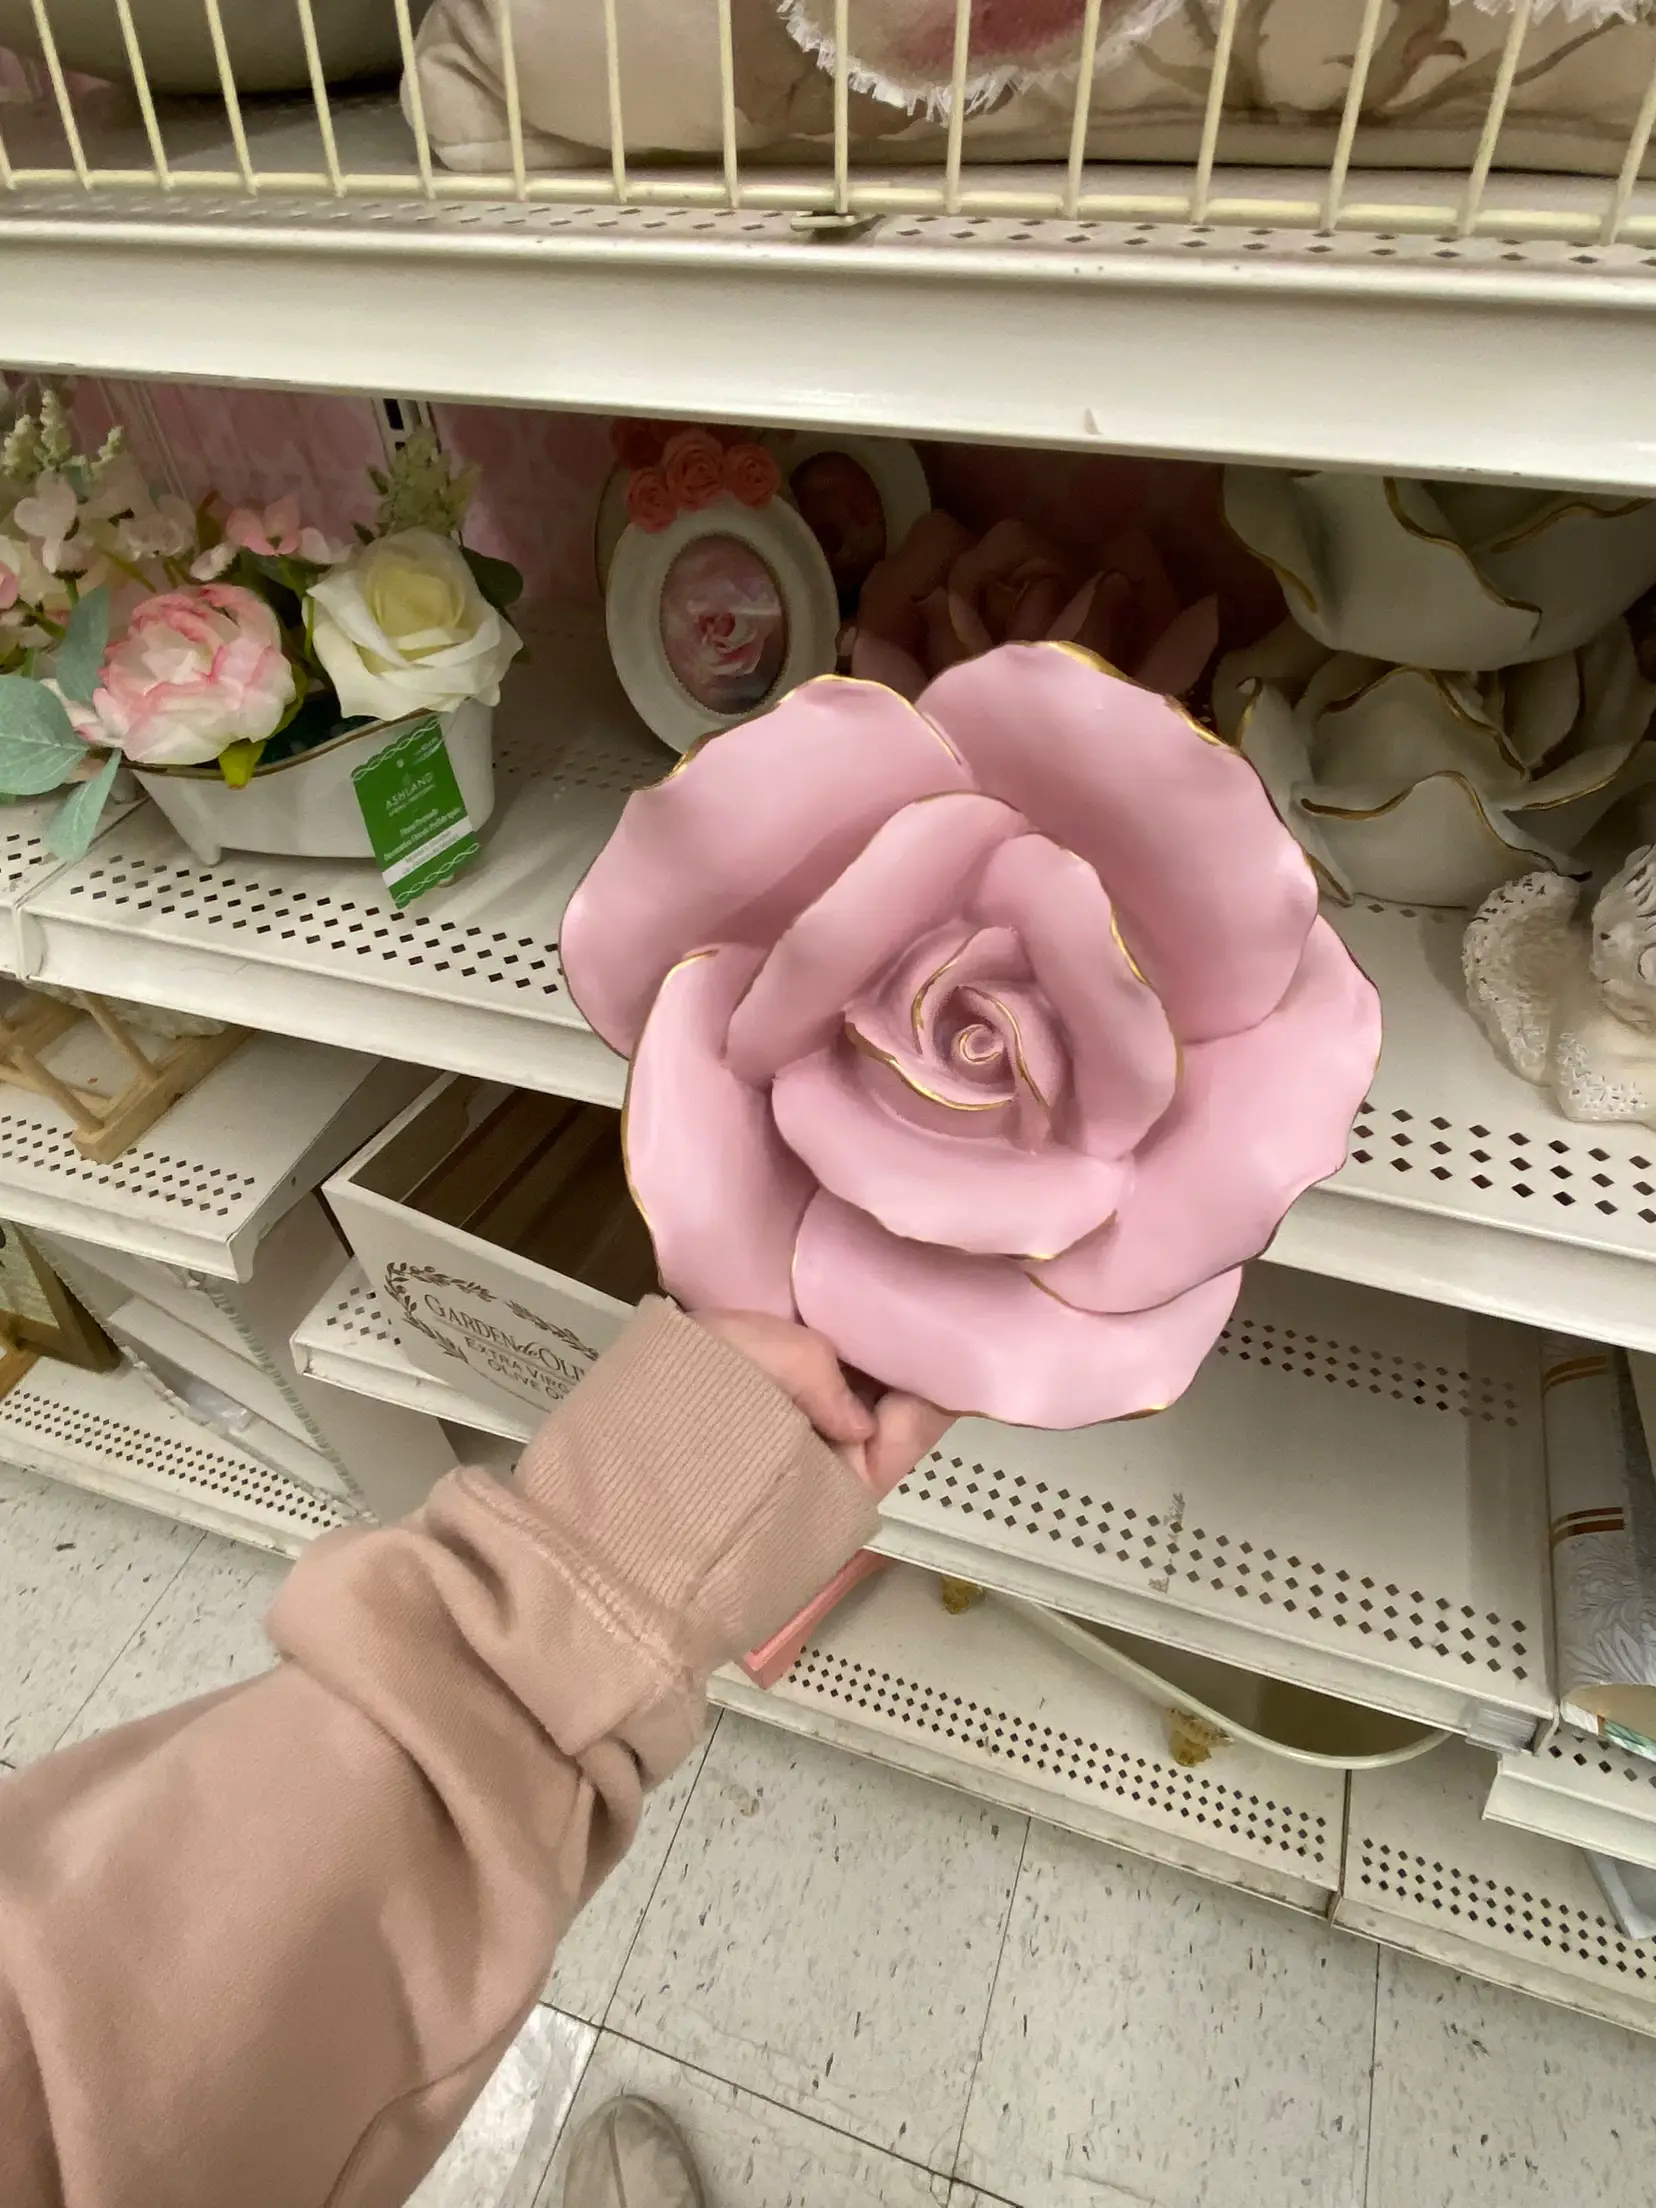  A hand holding a pink rose.